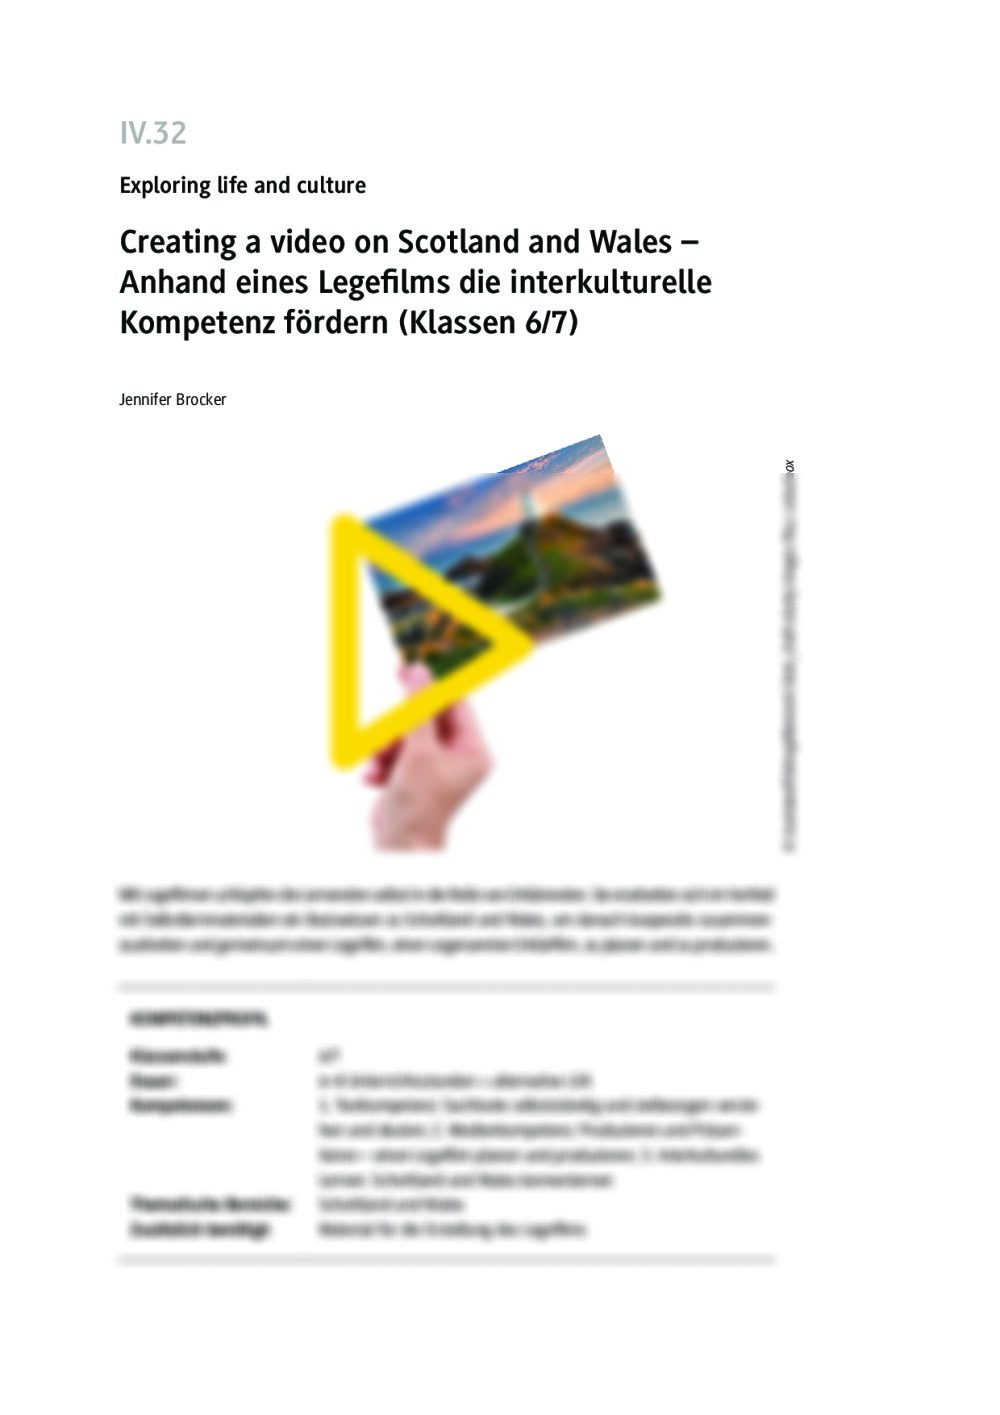 Creating a video on Scotland and Wales - Seite 1